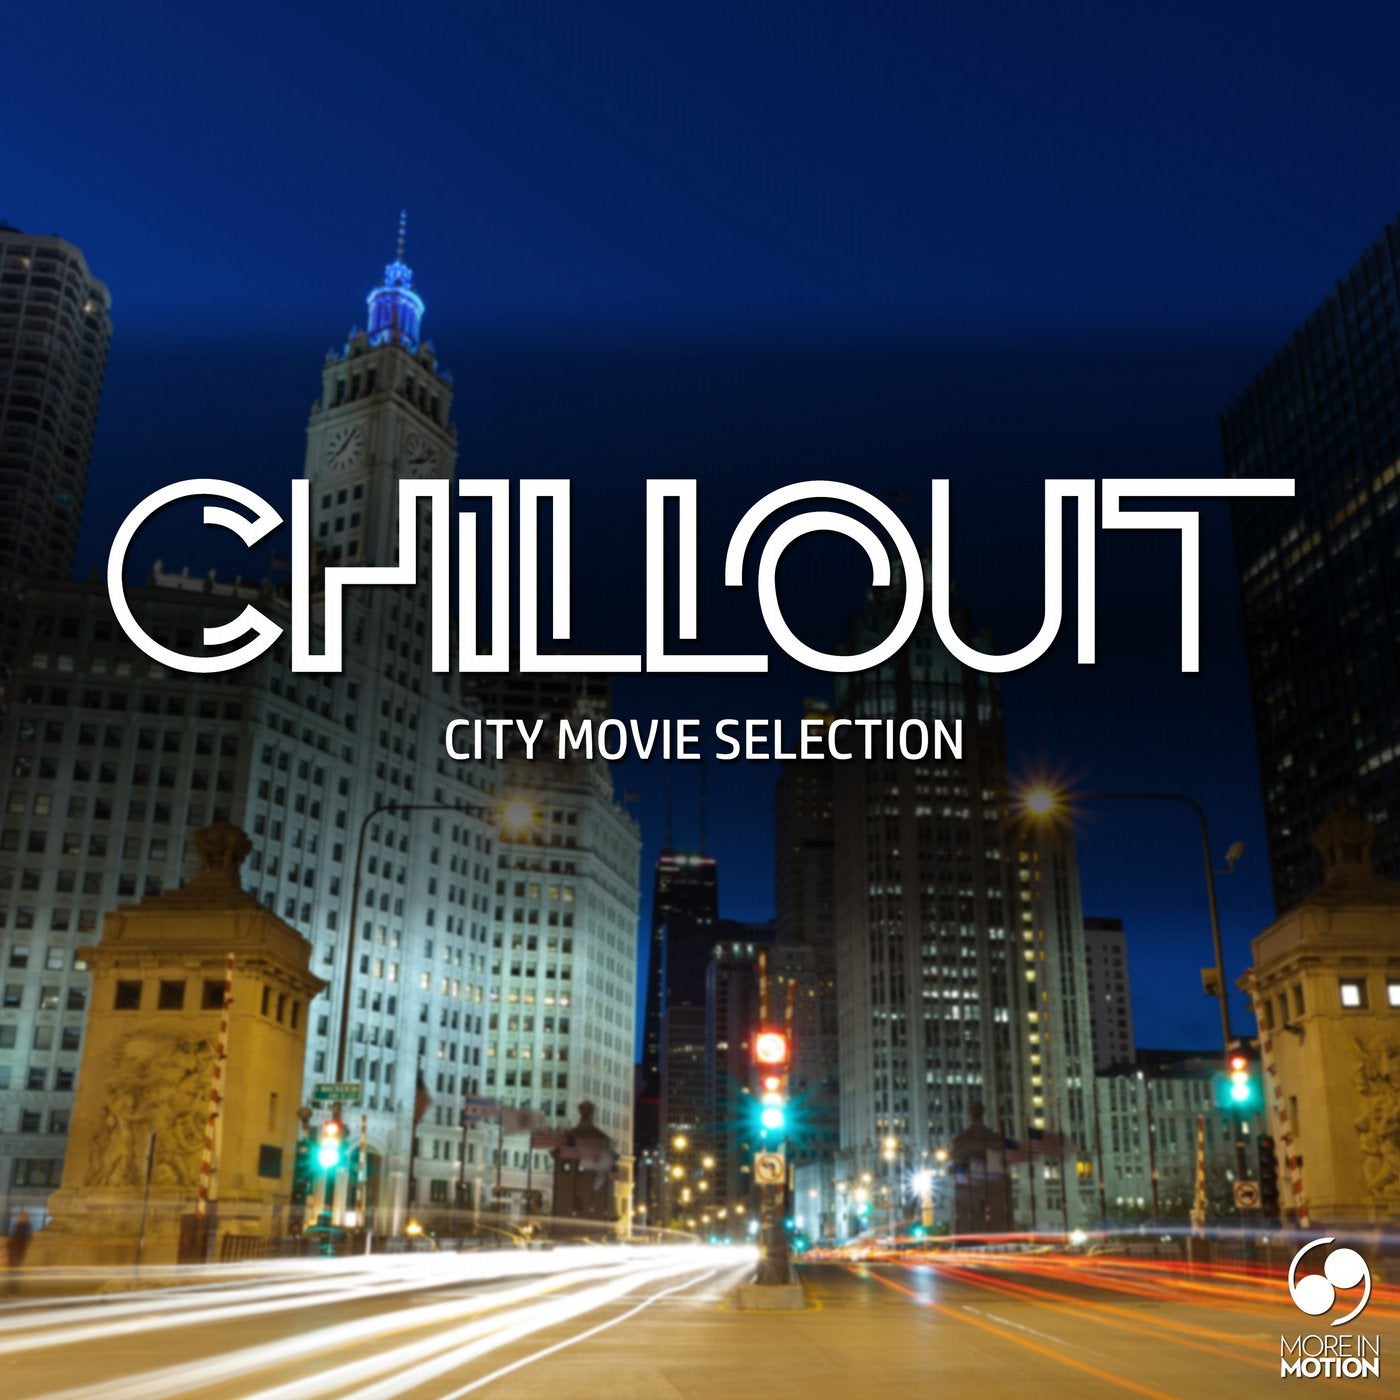 Chillout City Movie Selection